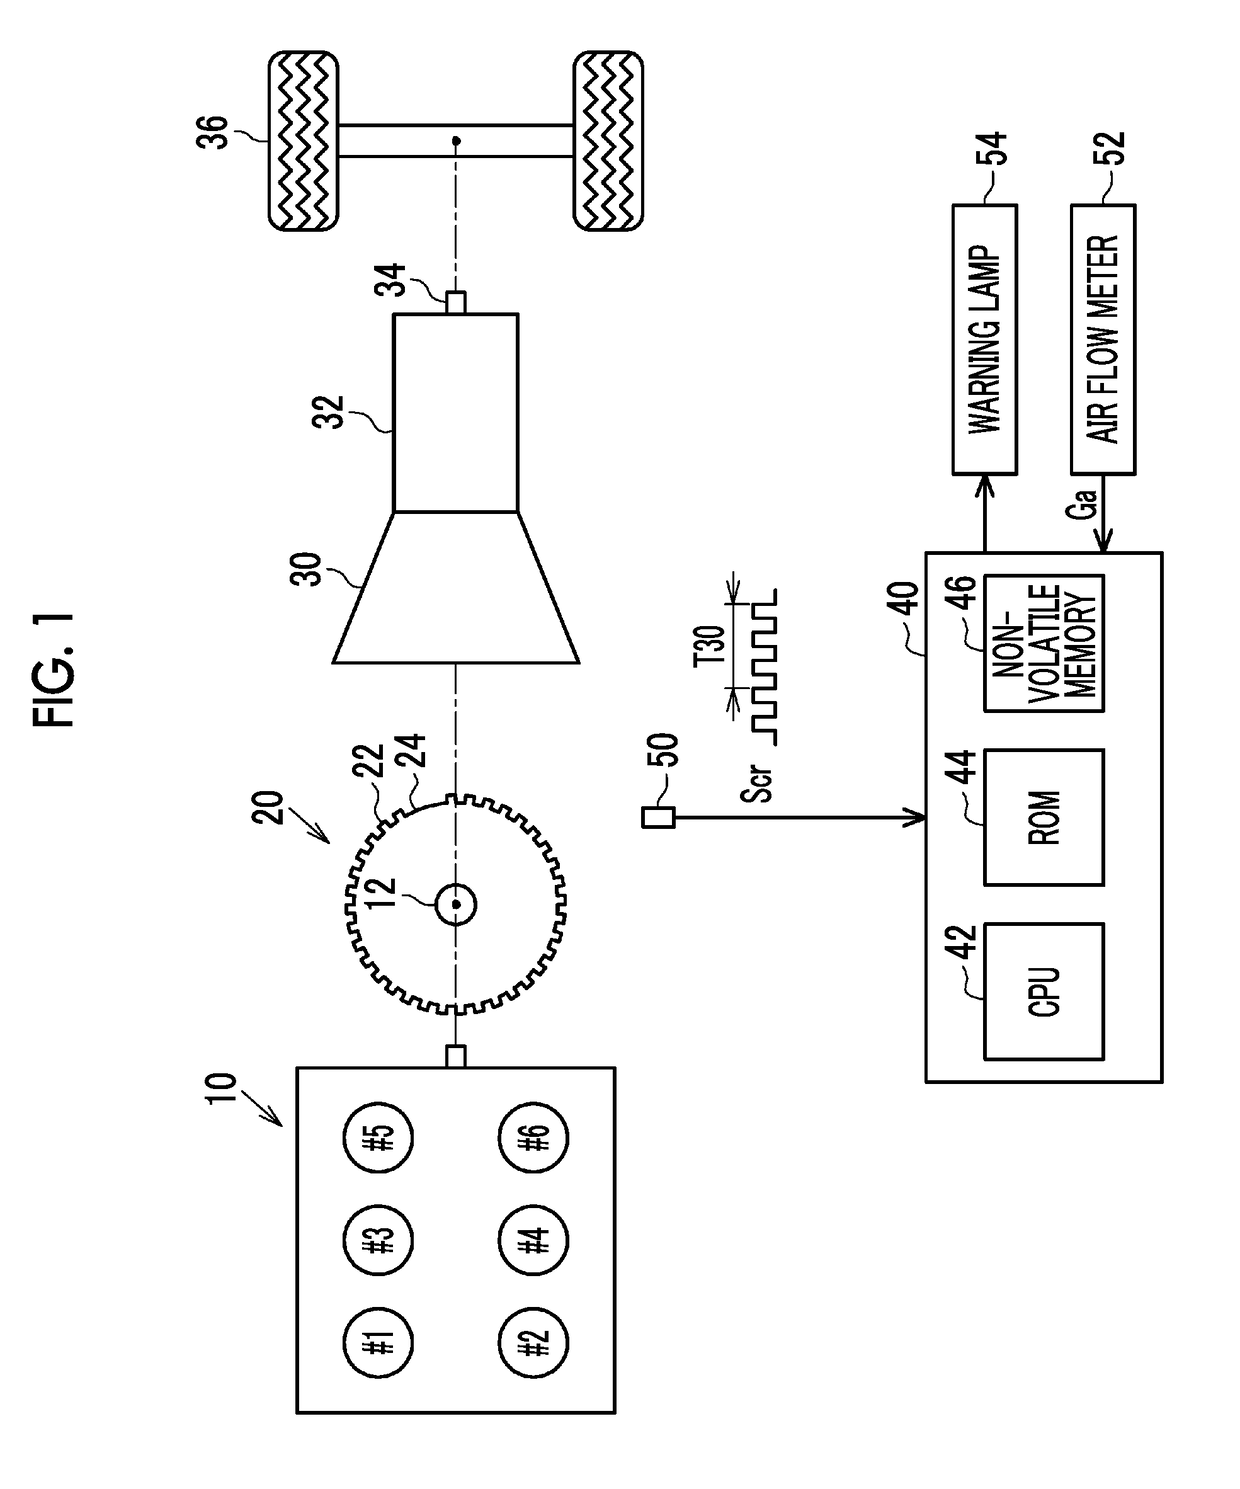 Misfire detection device for internal combustion engine